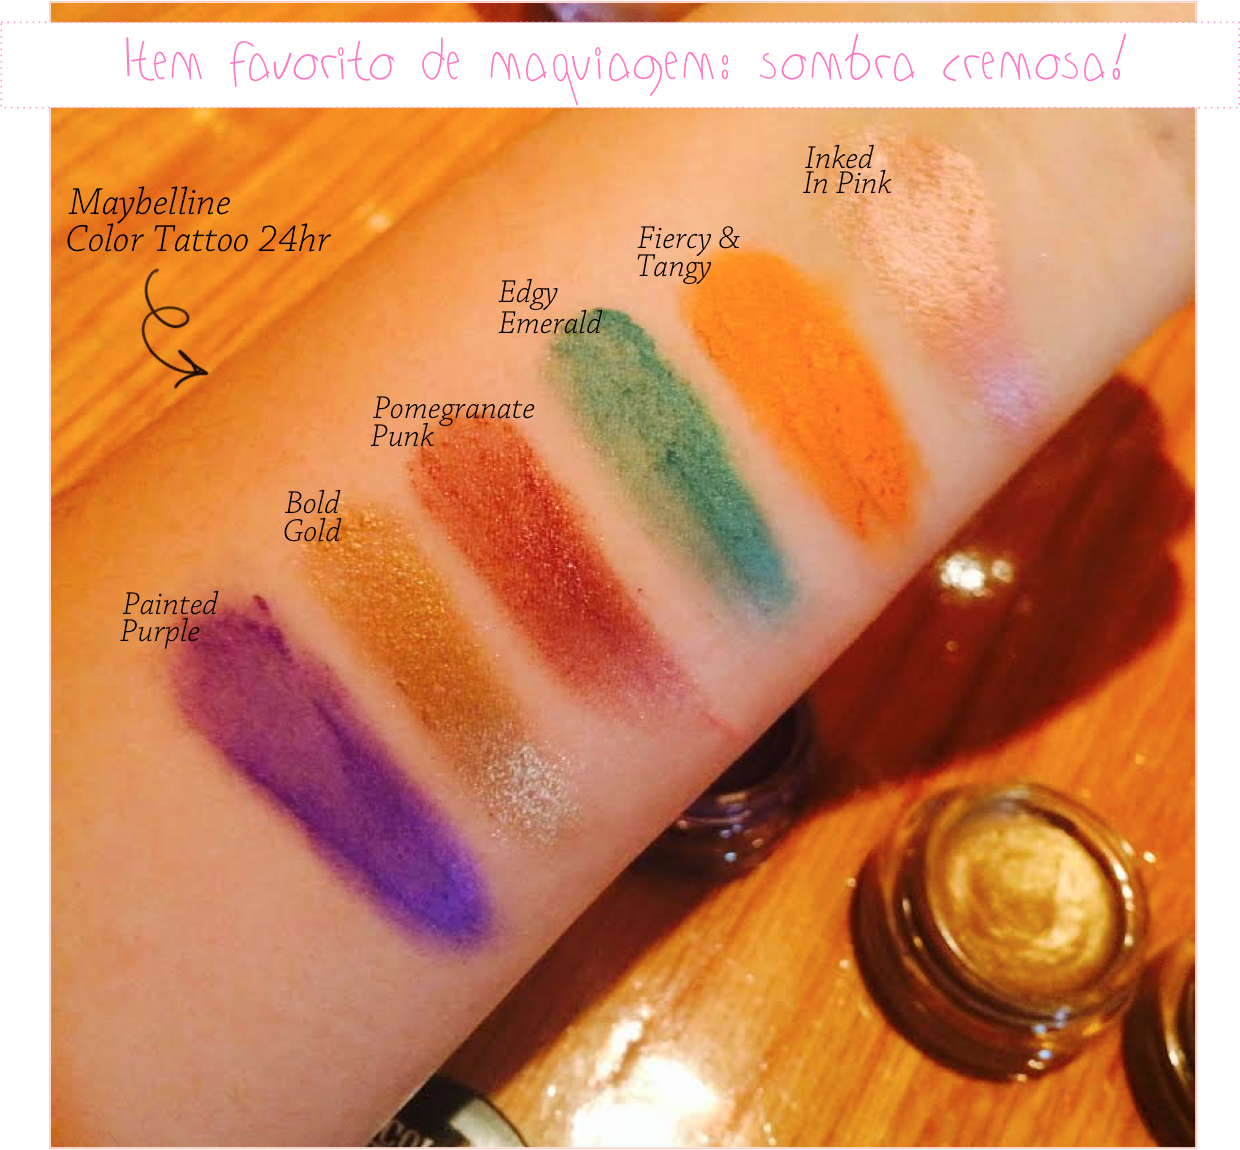 color tattoo maybelline sombra cremosa